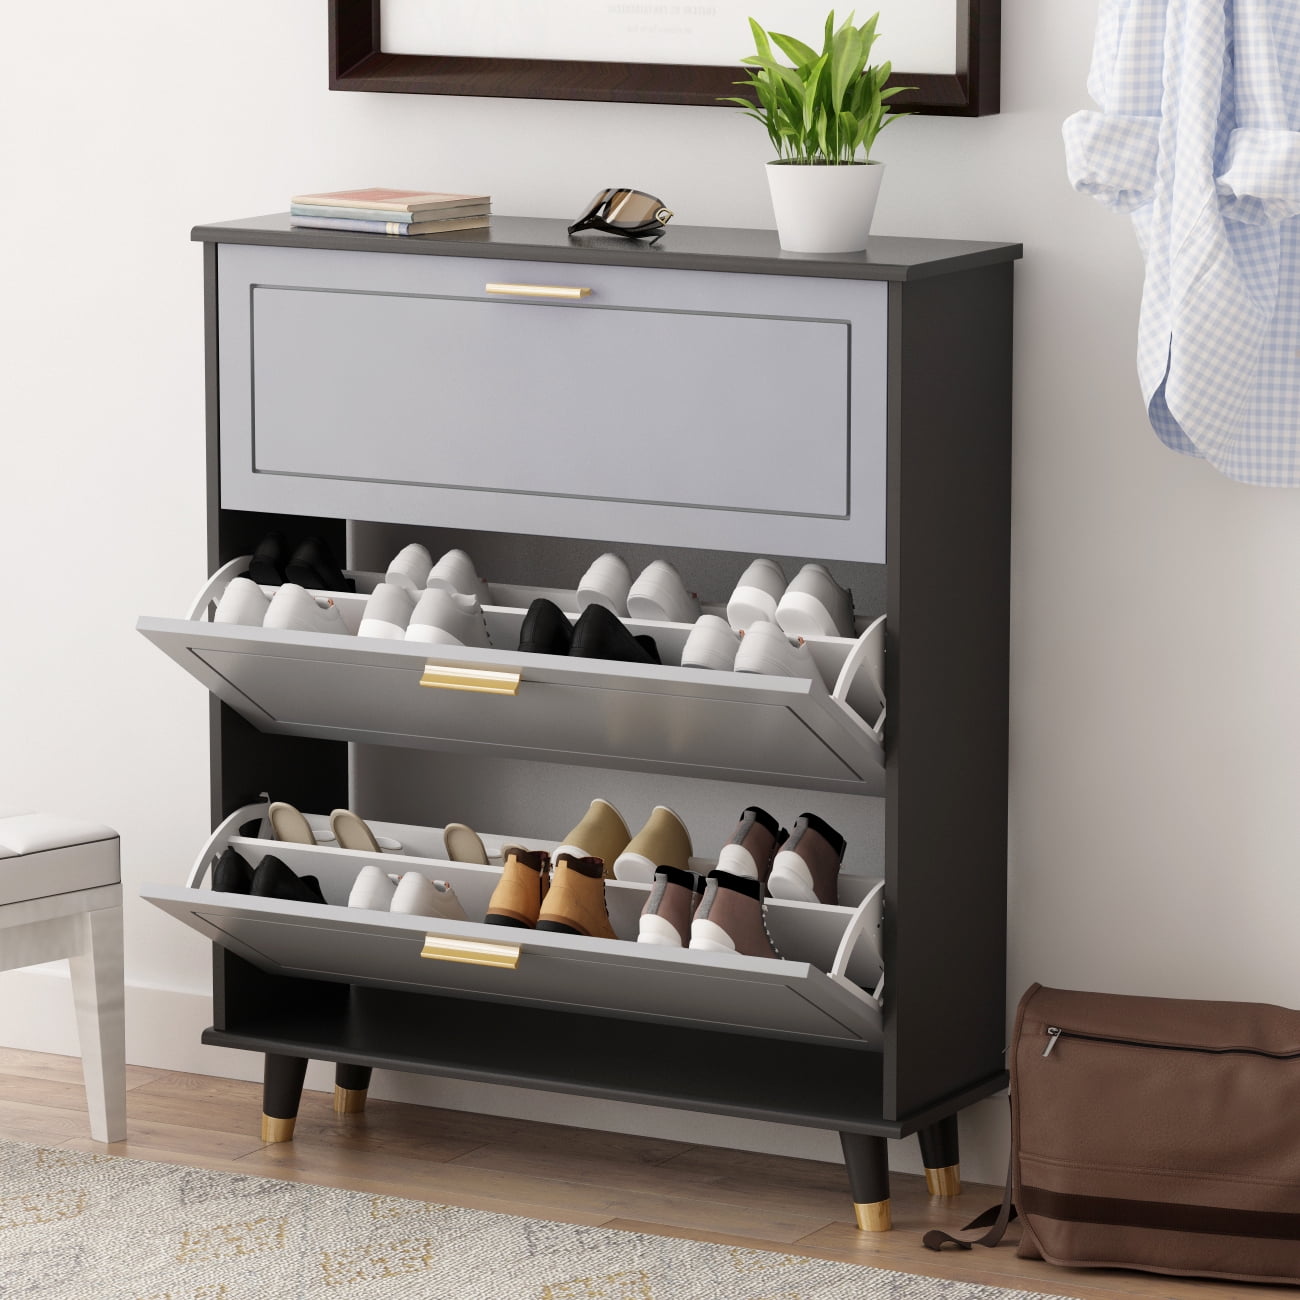 Buy Freedom 1 Door Shoe Cabinet in Sandy Brown Colour at 18% OFF by Nilkamal  | Pepperfry